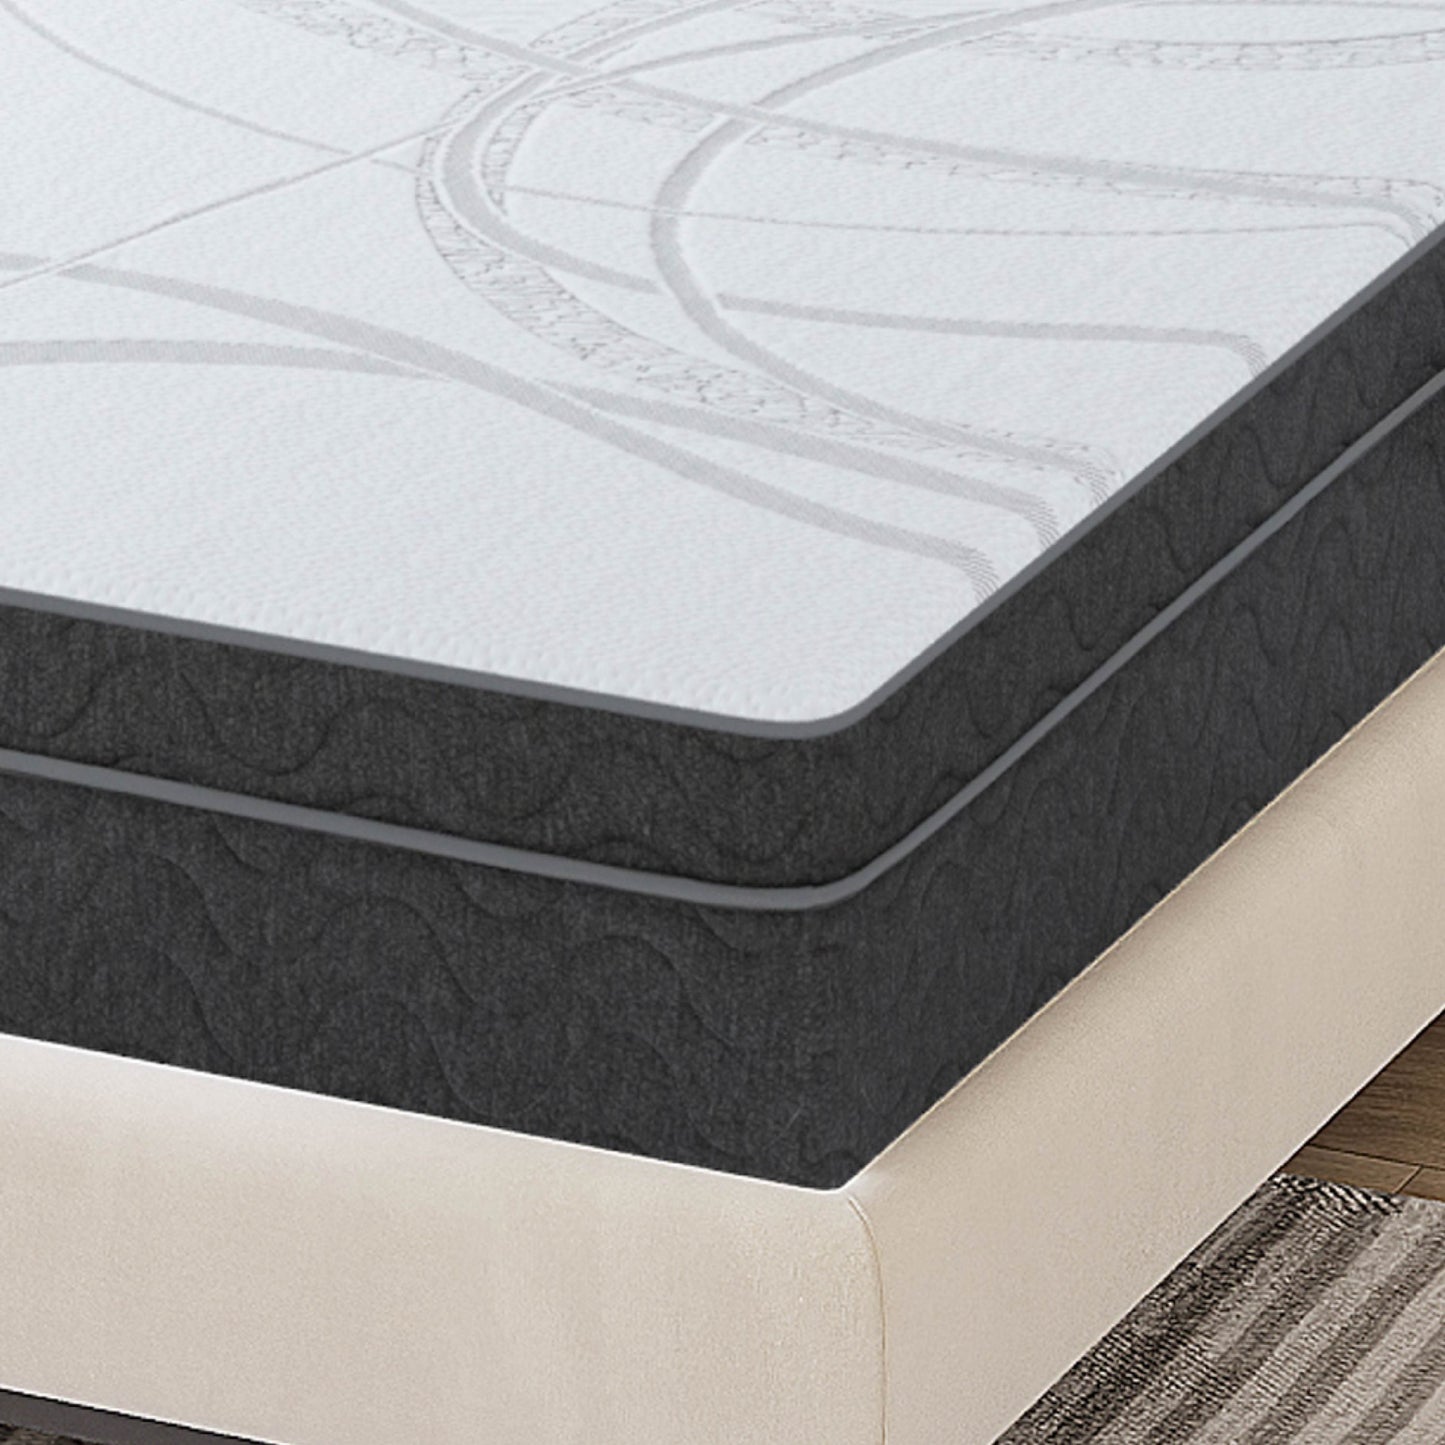 EGO Hybrid 10 Inch Queen Mattress, Cooling Gel Infused Memory Foam and Individual Pocket Spring Mattress, Made in USA, Mattress in a Box, CertiPUR-US Certified